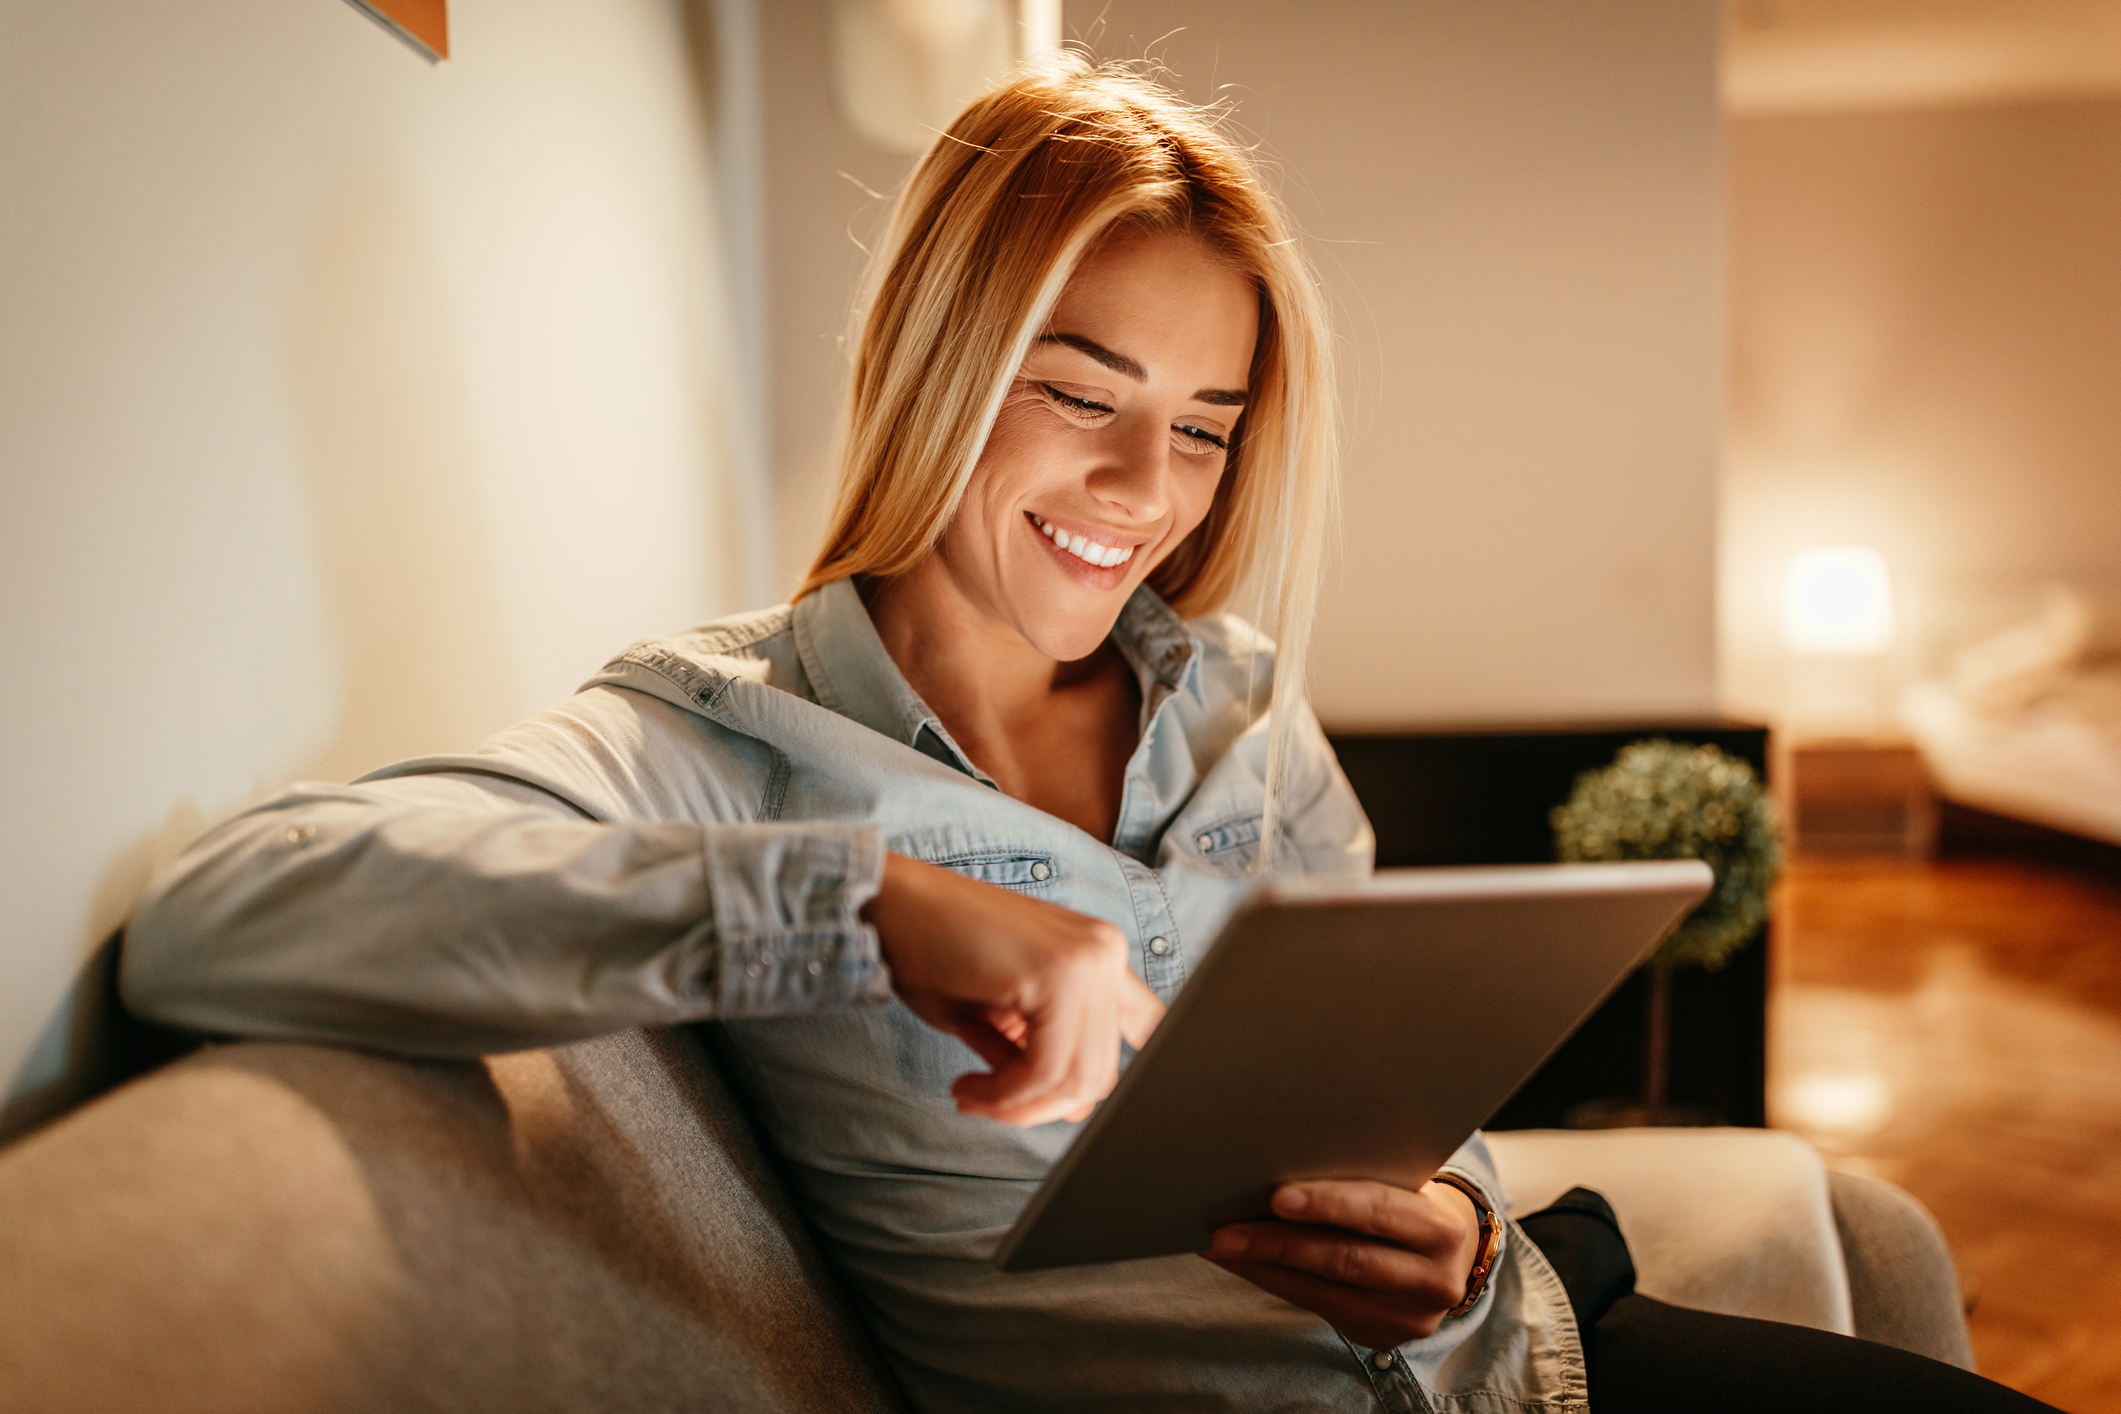 blonde woman smiling at tablet while scrolling screen at home